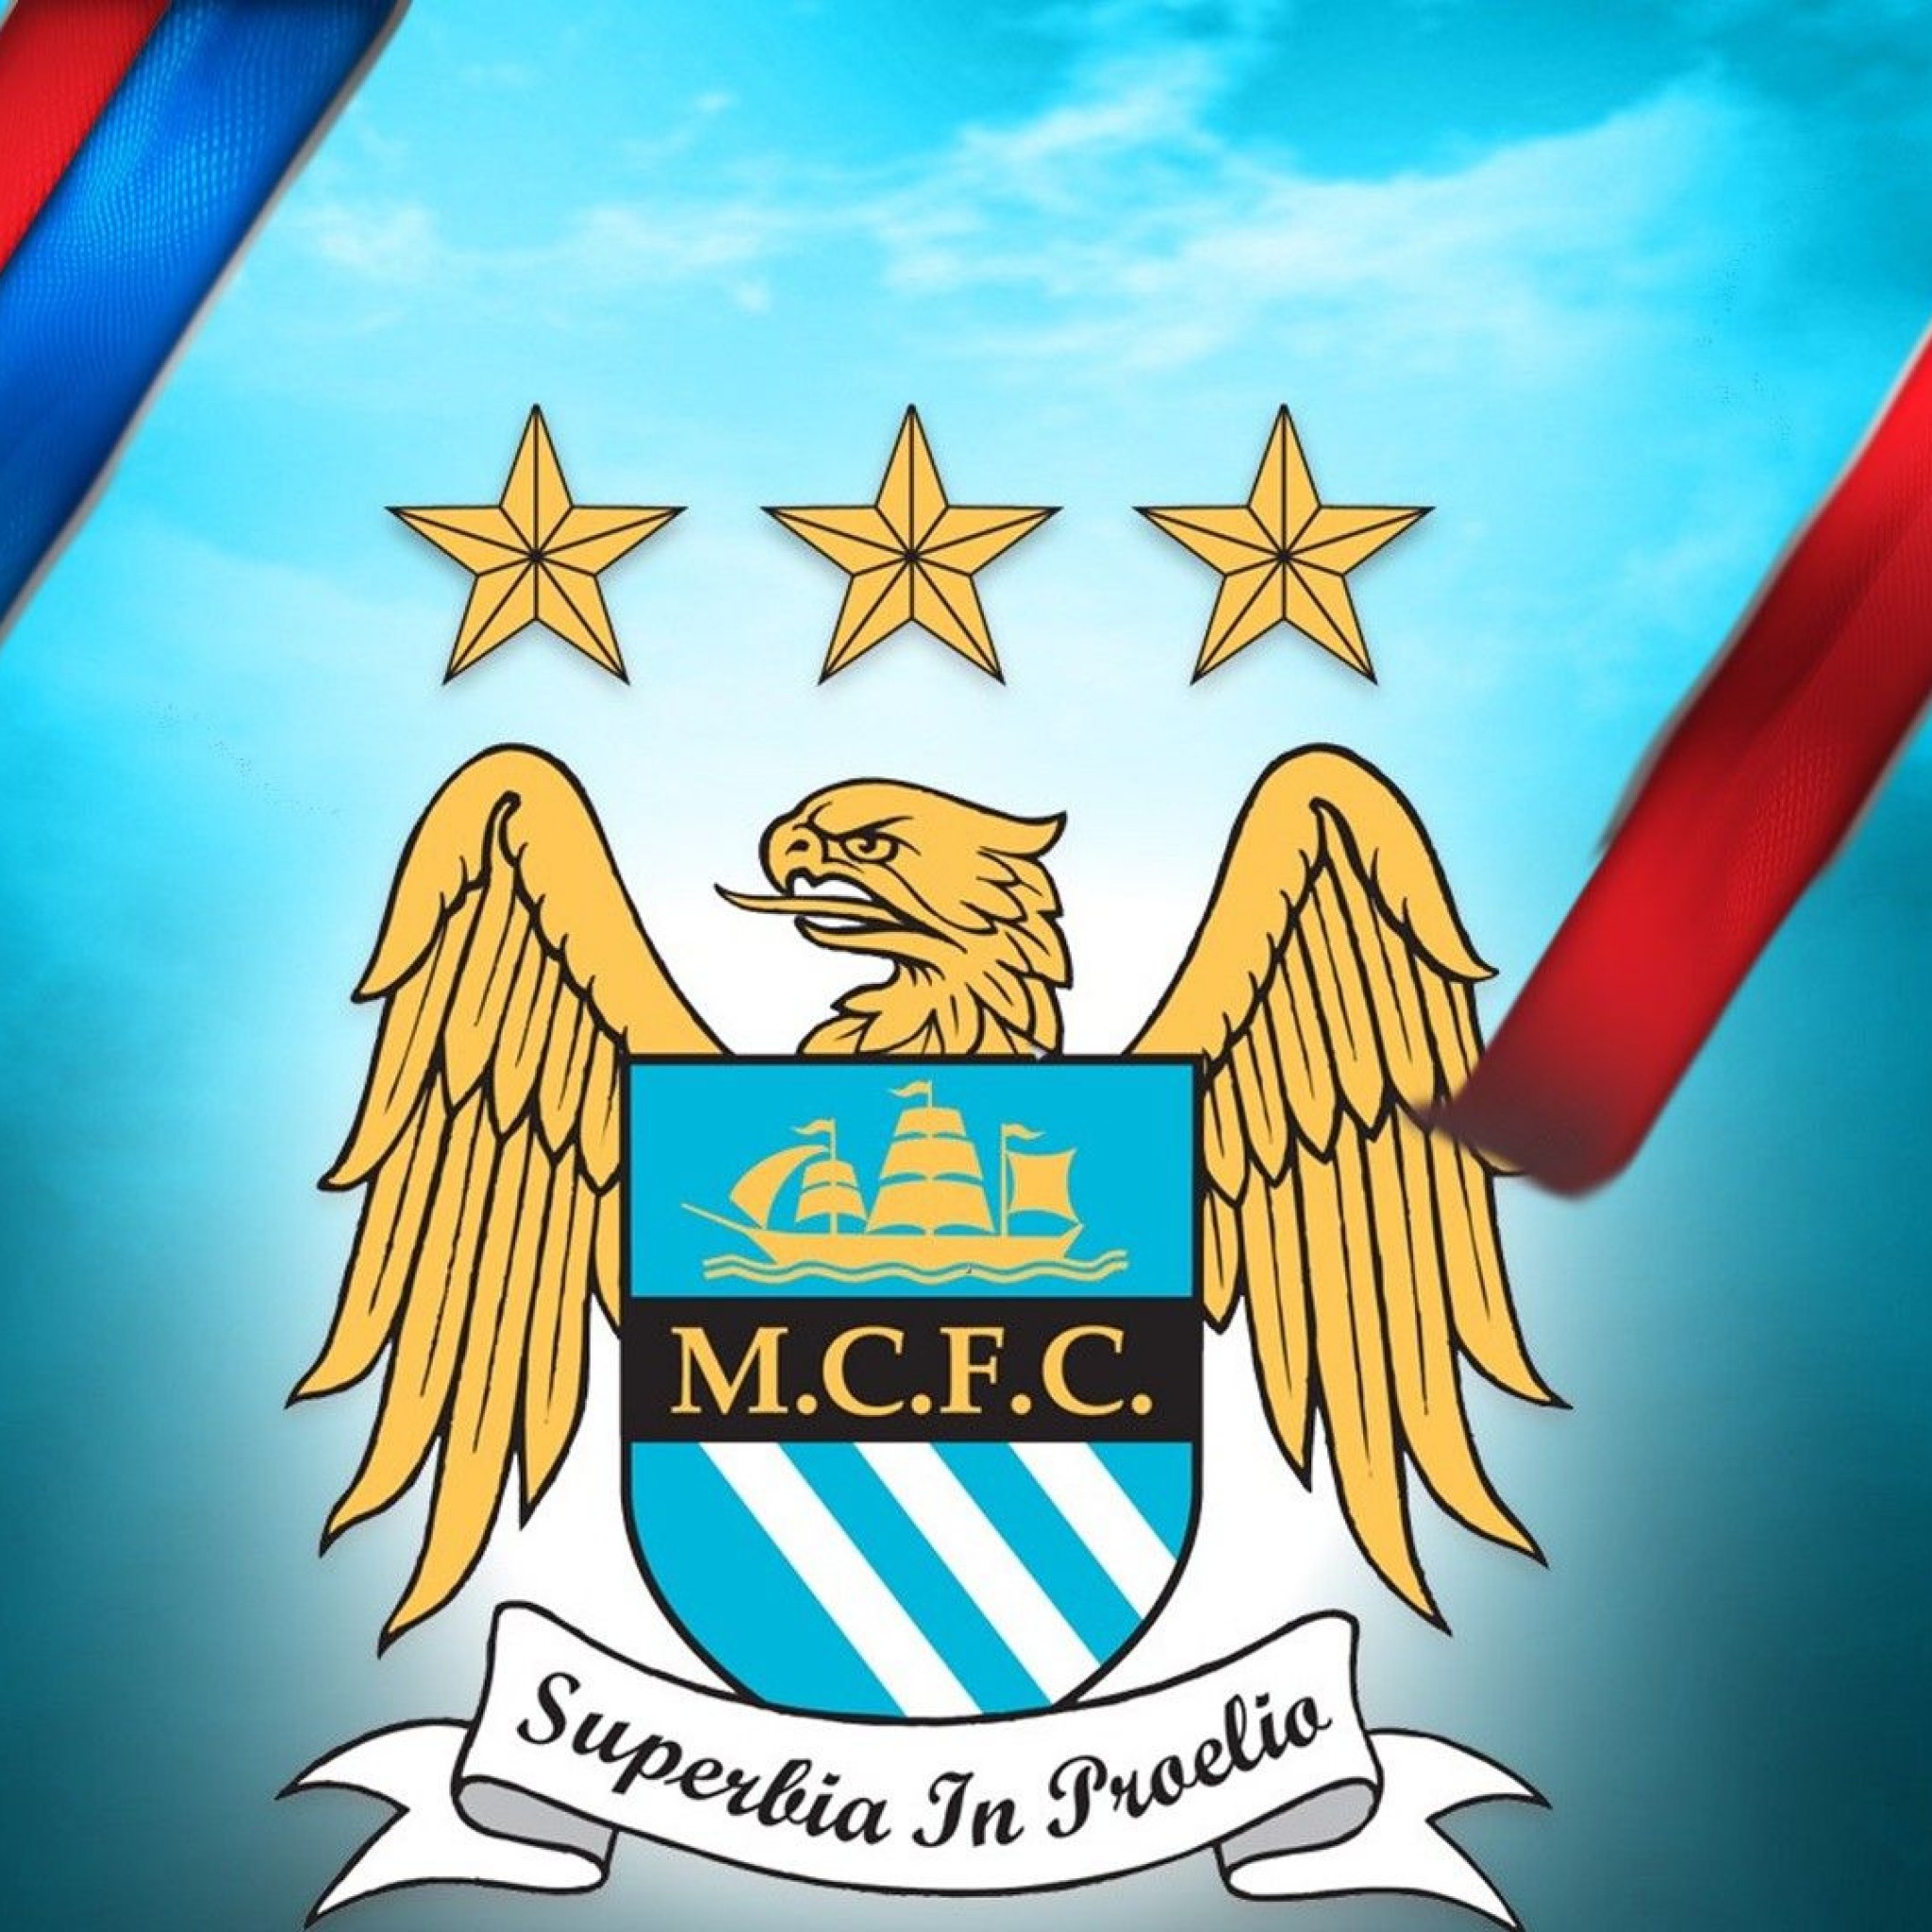 Free Download Manchester City Iphone Wallpaper Sports Wallpaper High Quality 48x48 For Your Desktop Mobile Tablet Explore 50 Manchester City Iphone Wallpaper Manchester United Wallpaper 15 Manchester City Wallpaper